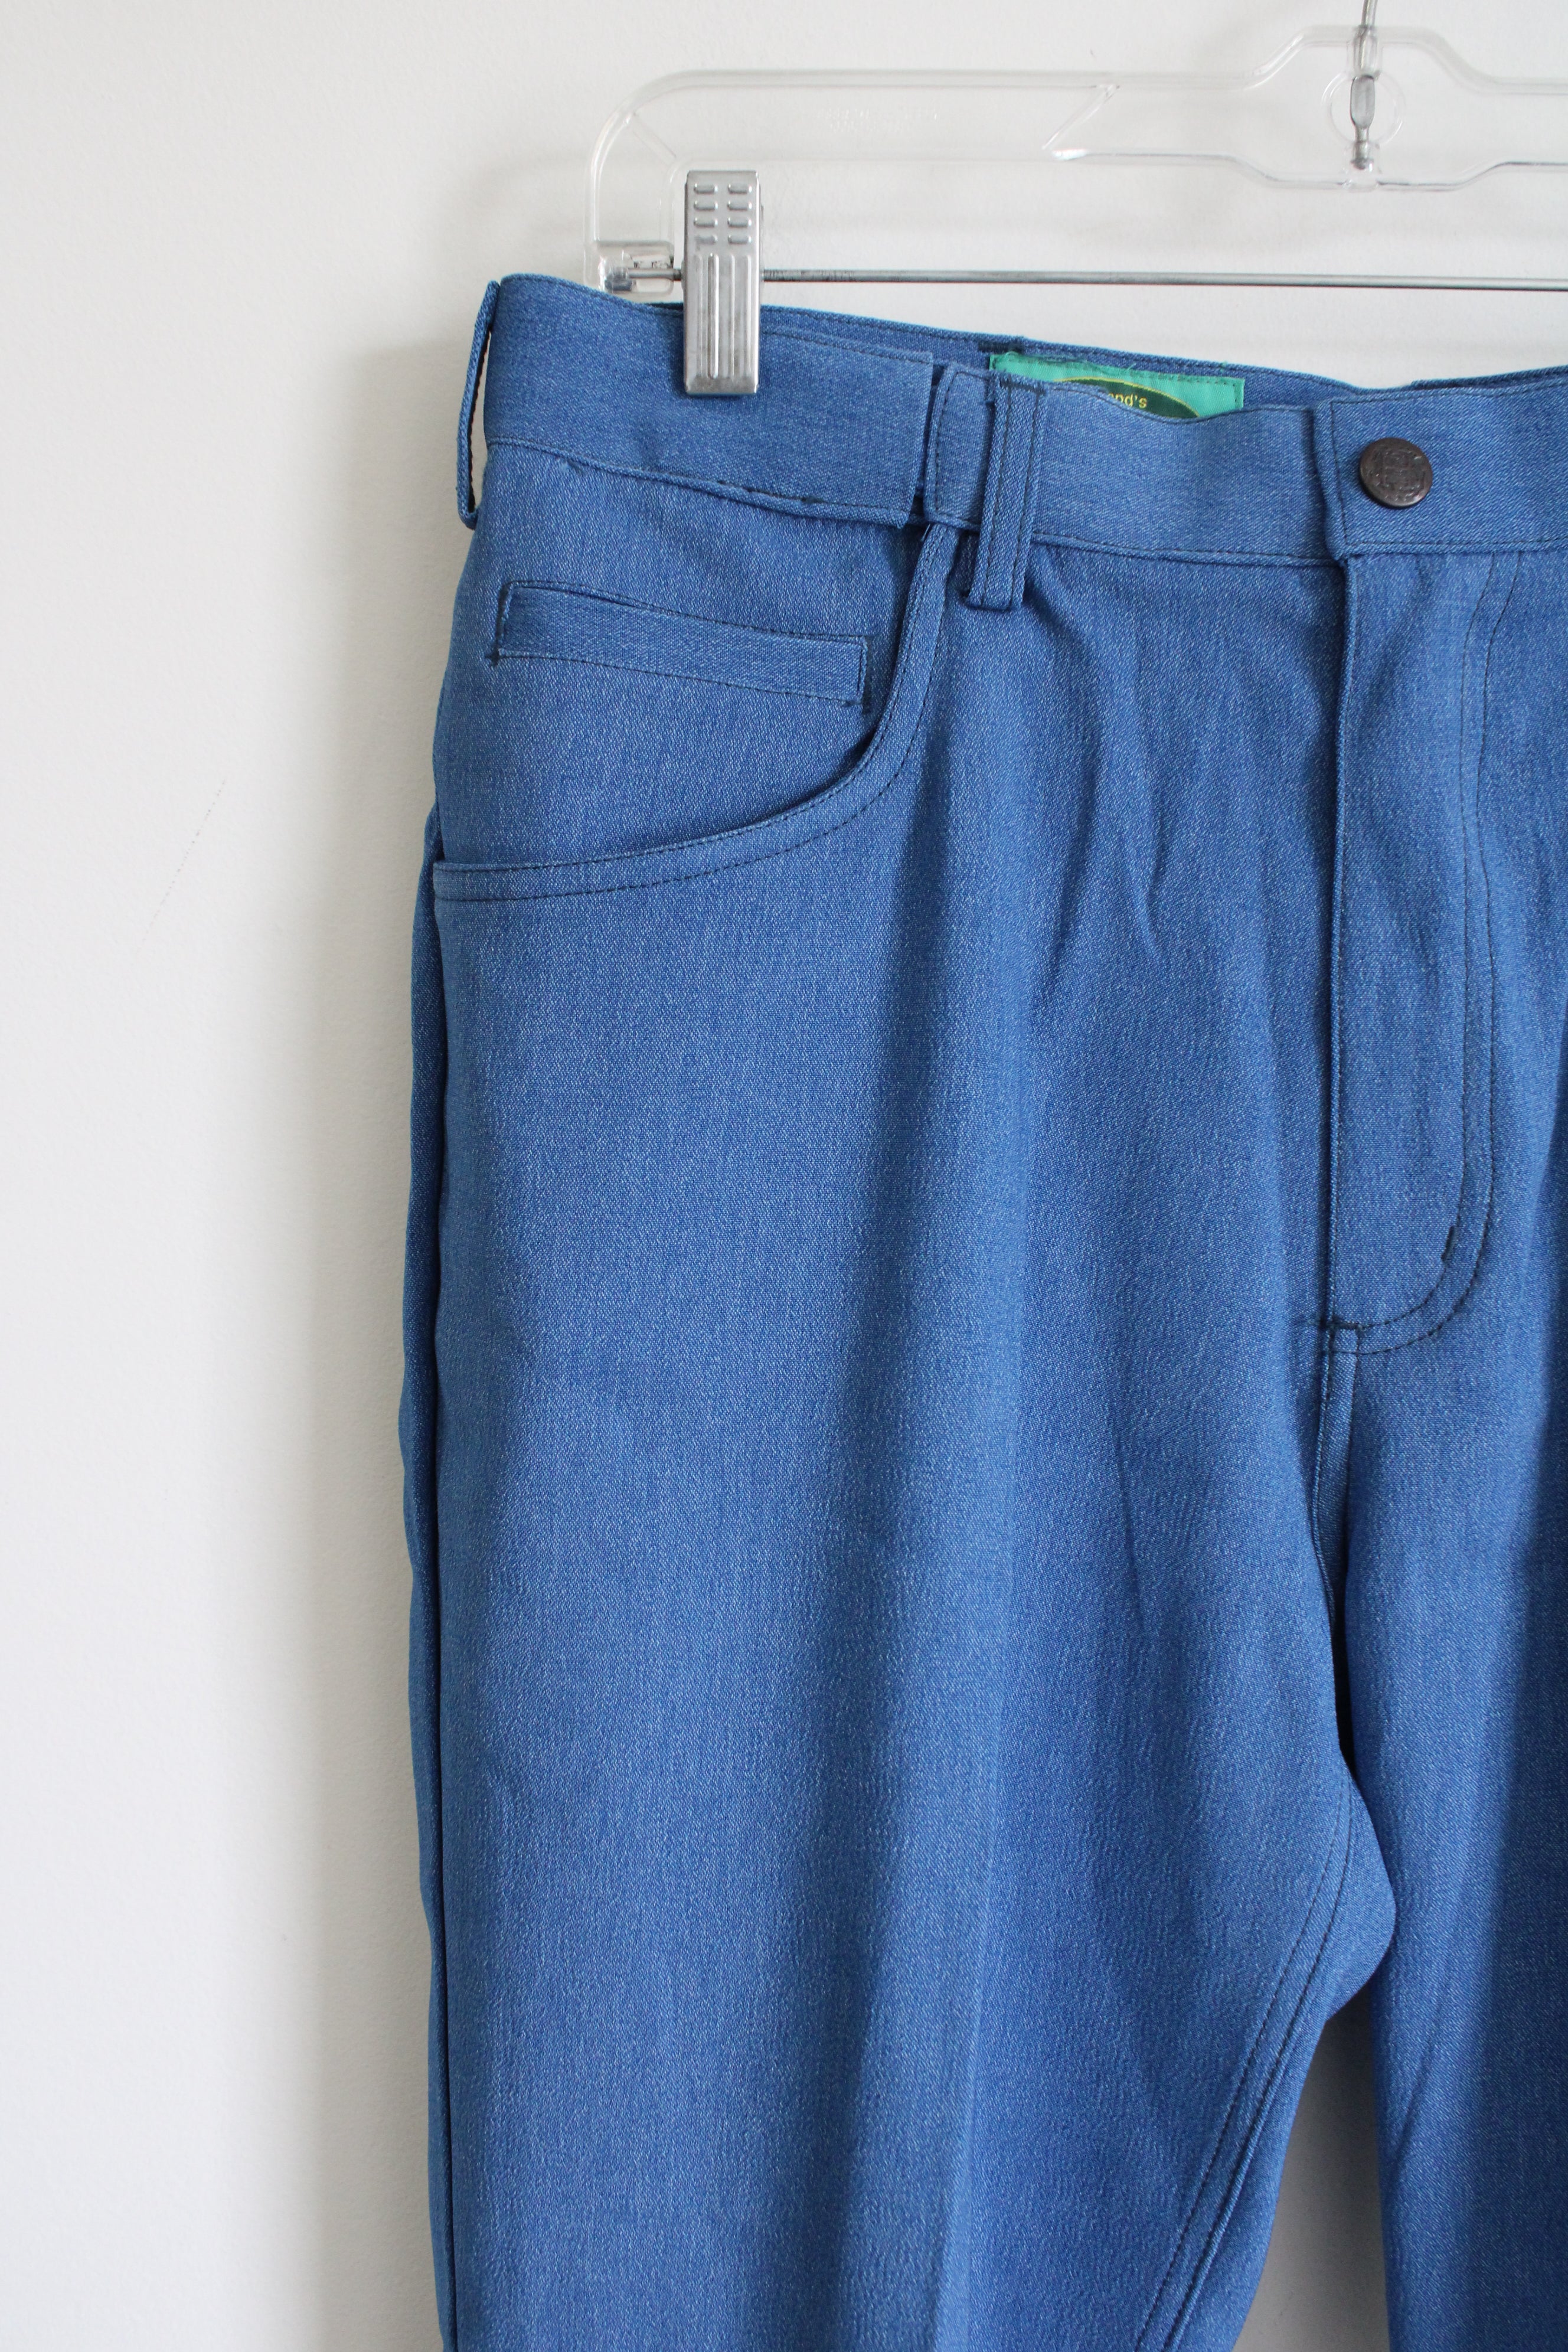 NEW Haband's Fit Forever Blue Pants | 34S